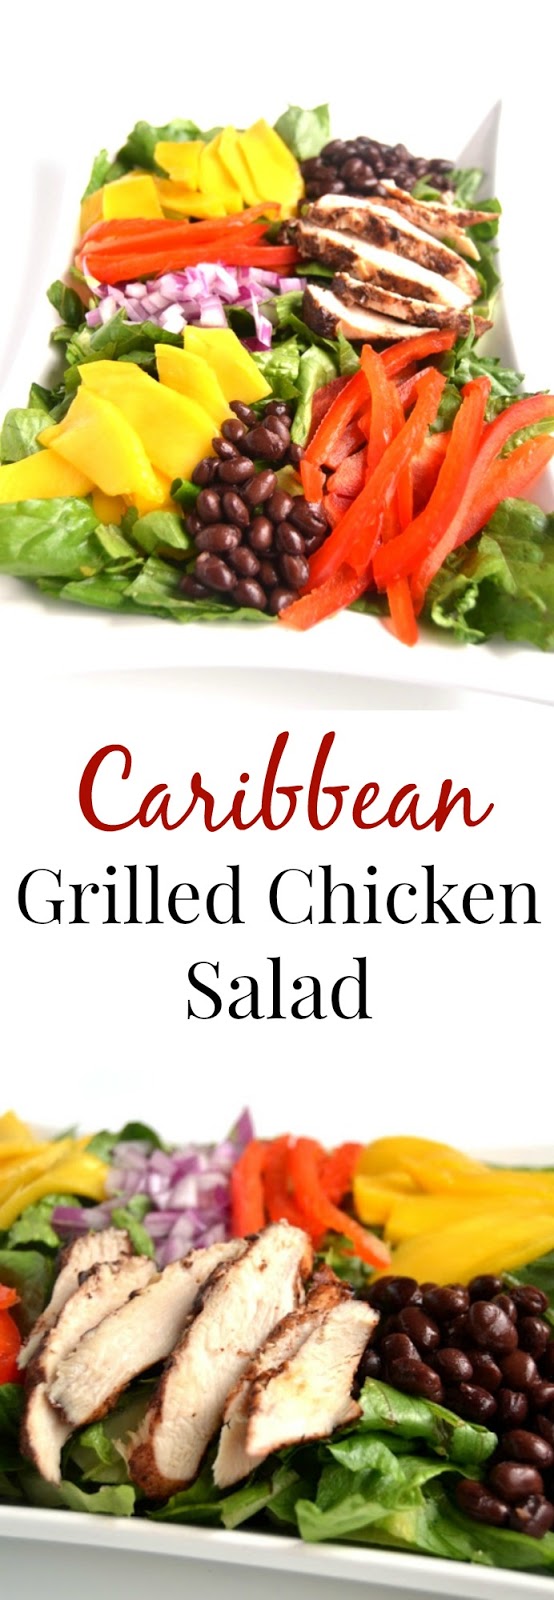 Caribbean Grilled Chicken Salad is made with a flavorful dry-rubbed grilled chicken, juicy mangoes, red peppers and black beans with lime vinaigrette! www.nutritionistreviews.com